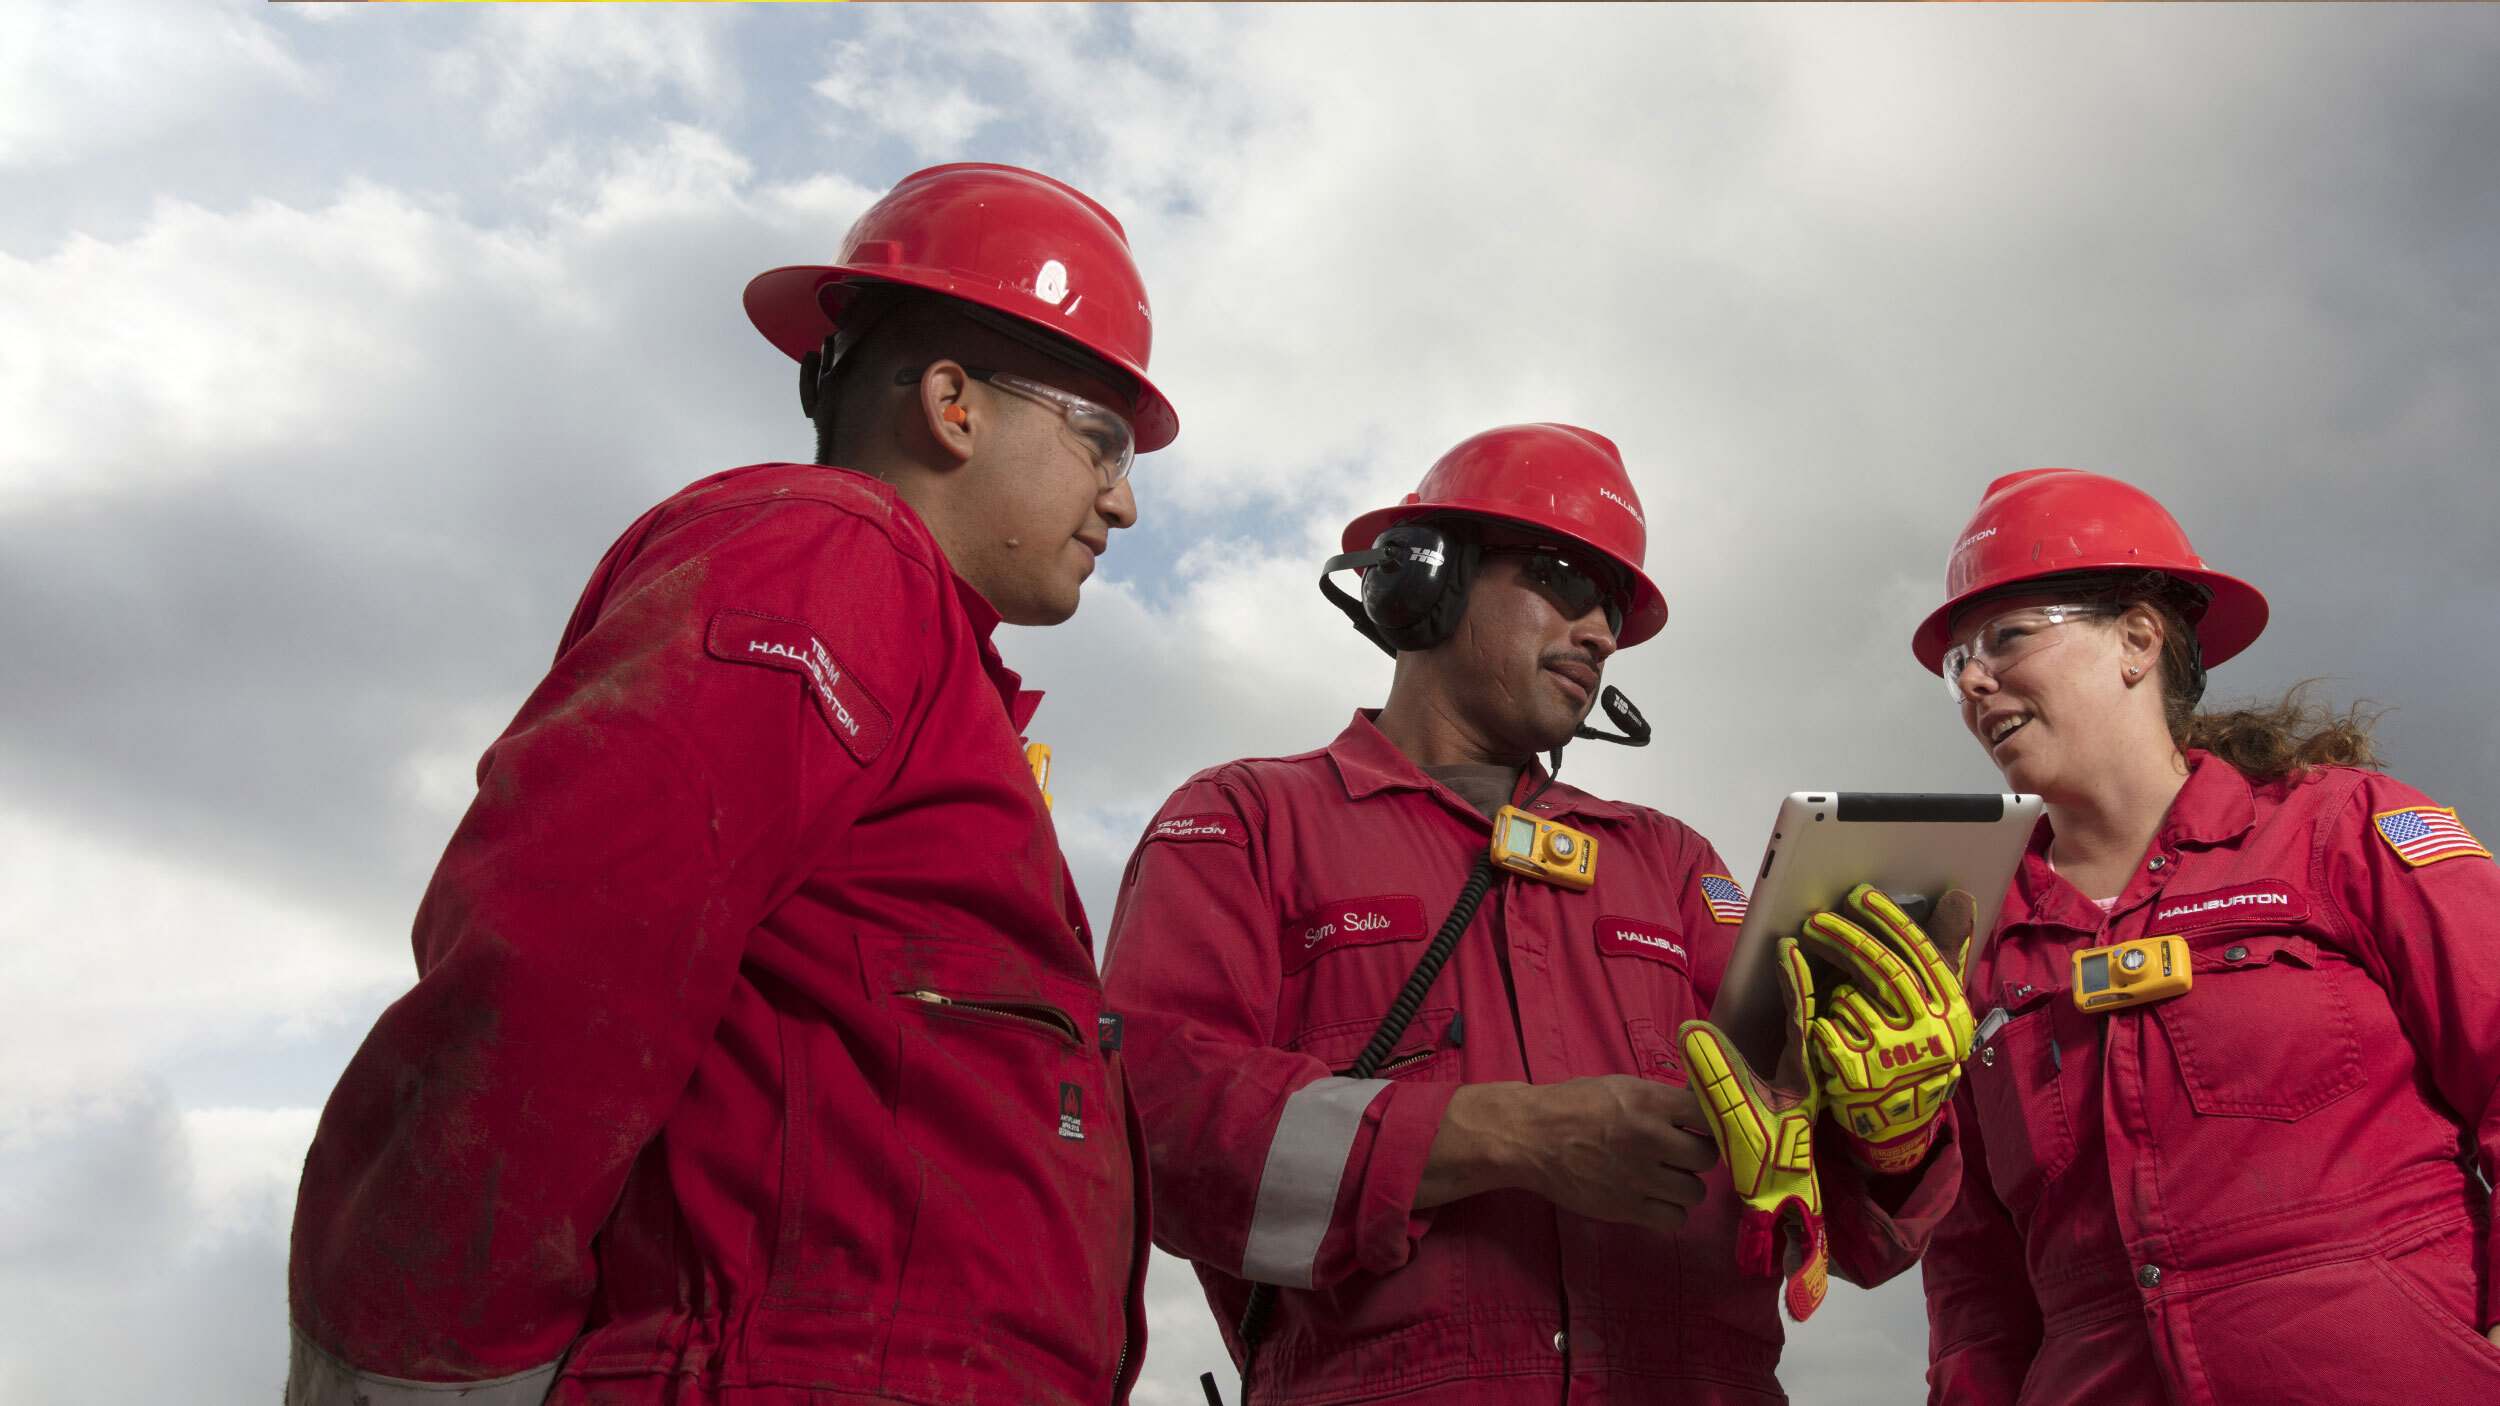 Deepwater projects successfully launched with Halliburton's technology